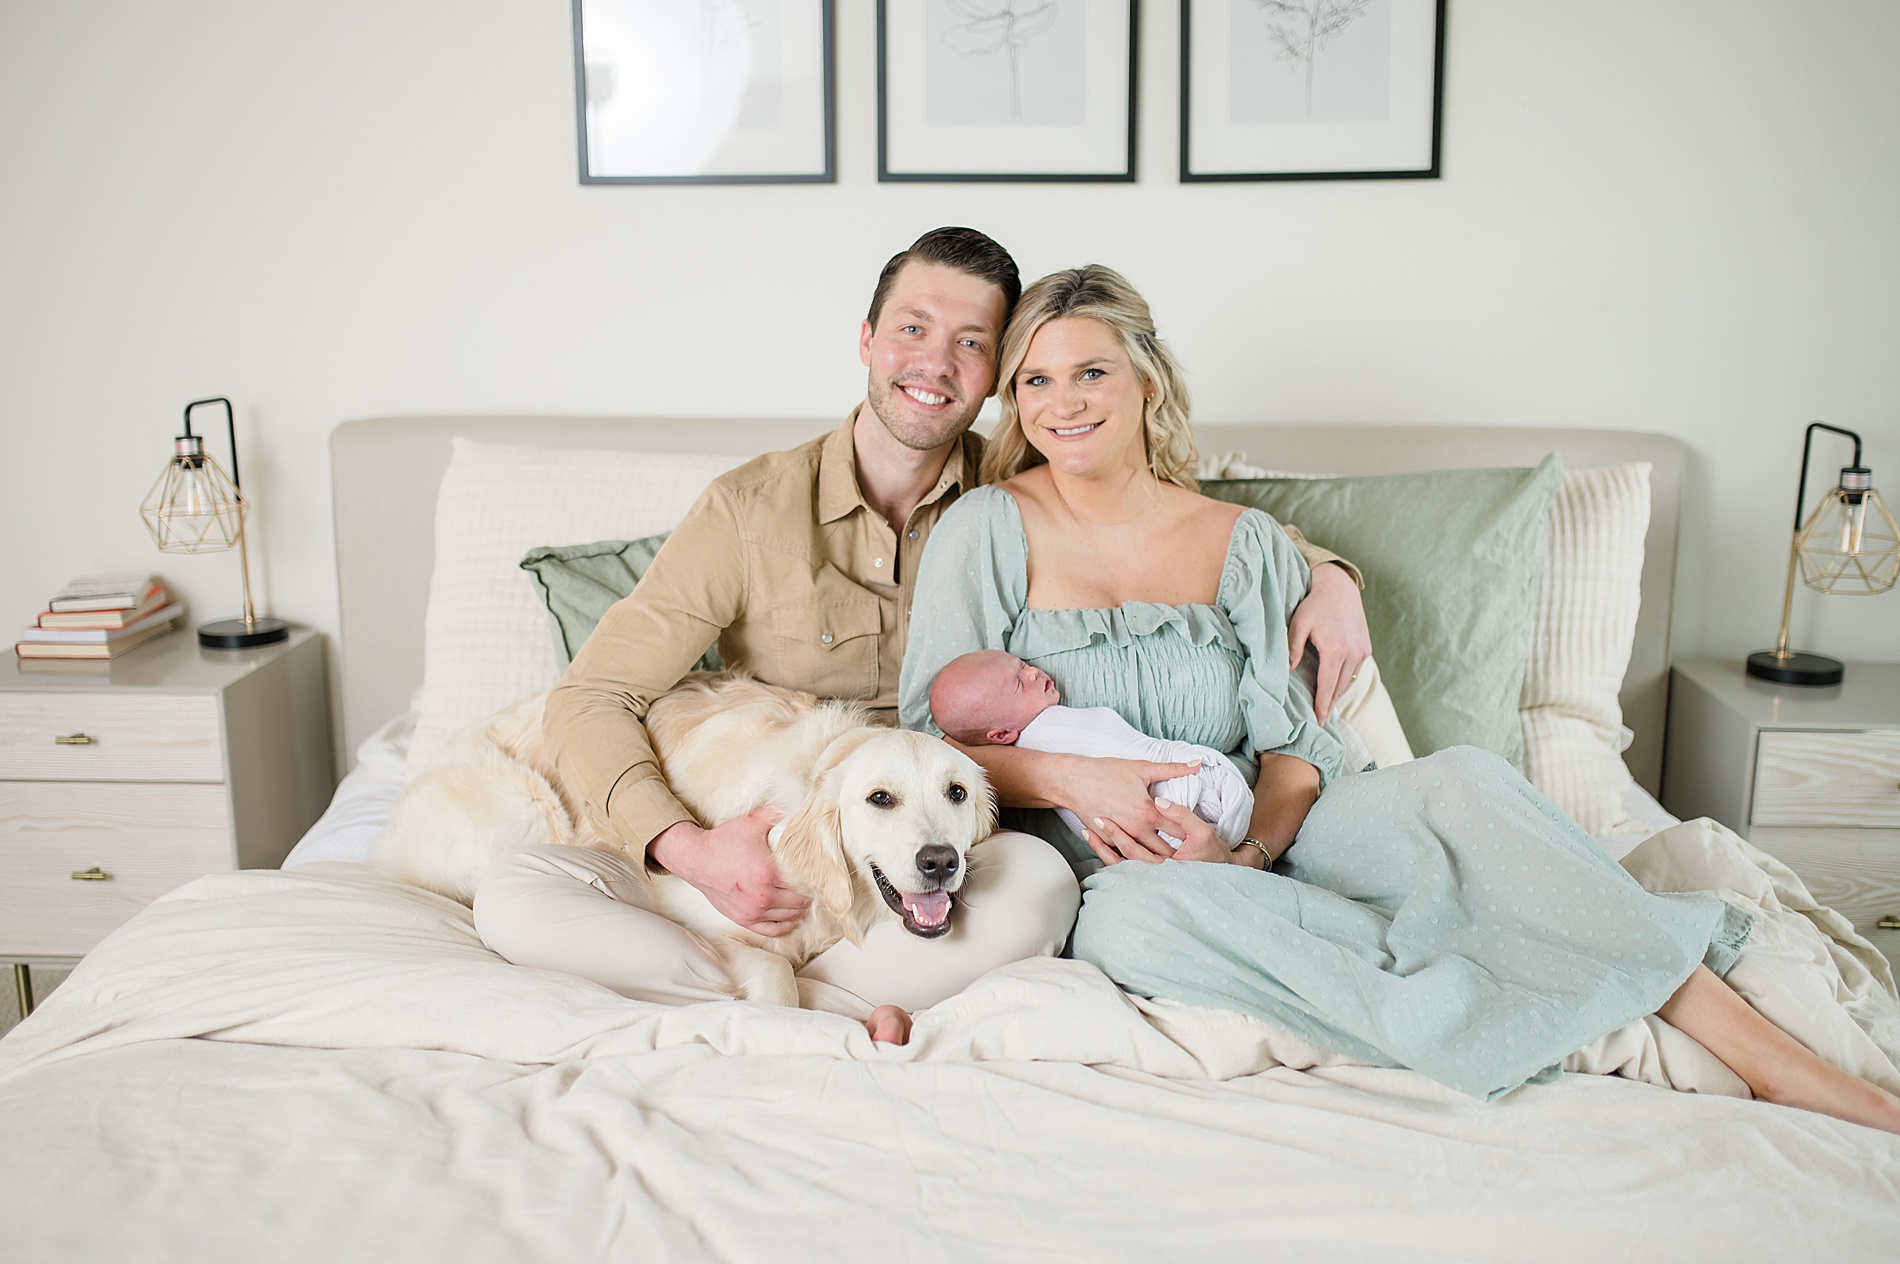 new family of three and their family dog sit on bed during in-home family session taken by Dallas Newborn photographer, Lindsey Dutton Photography
